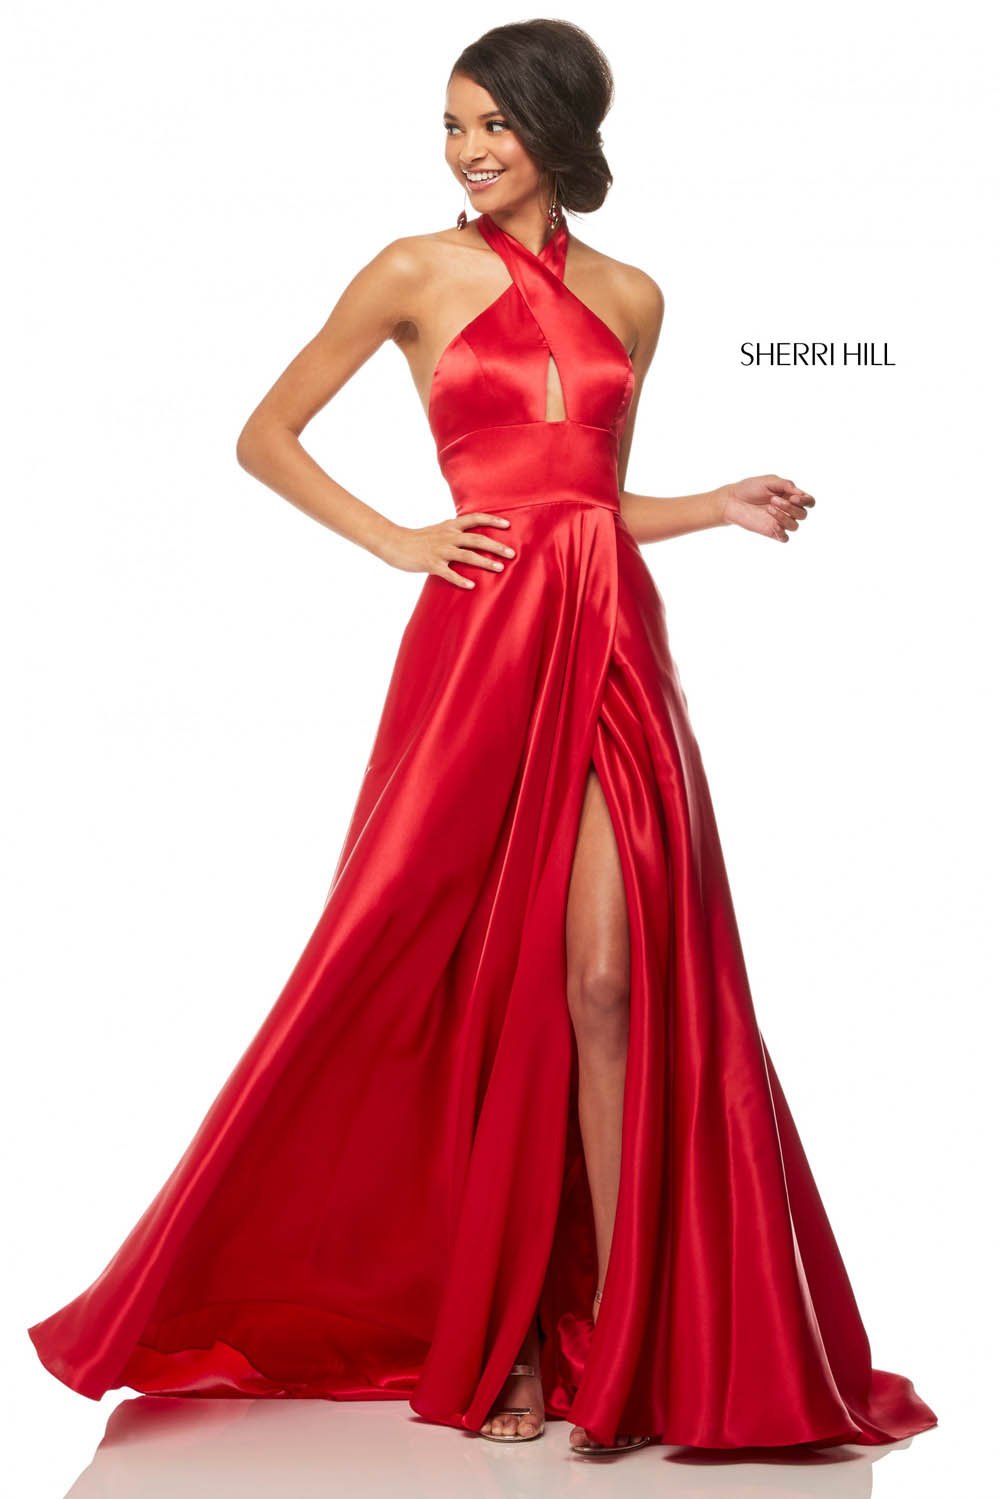 Sherri Hill 52745 dress images in these colors: Wine, Turquoise, Emerald, Royal, Red.